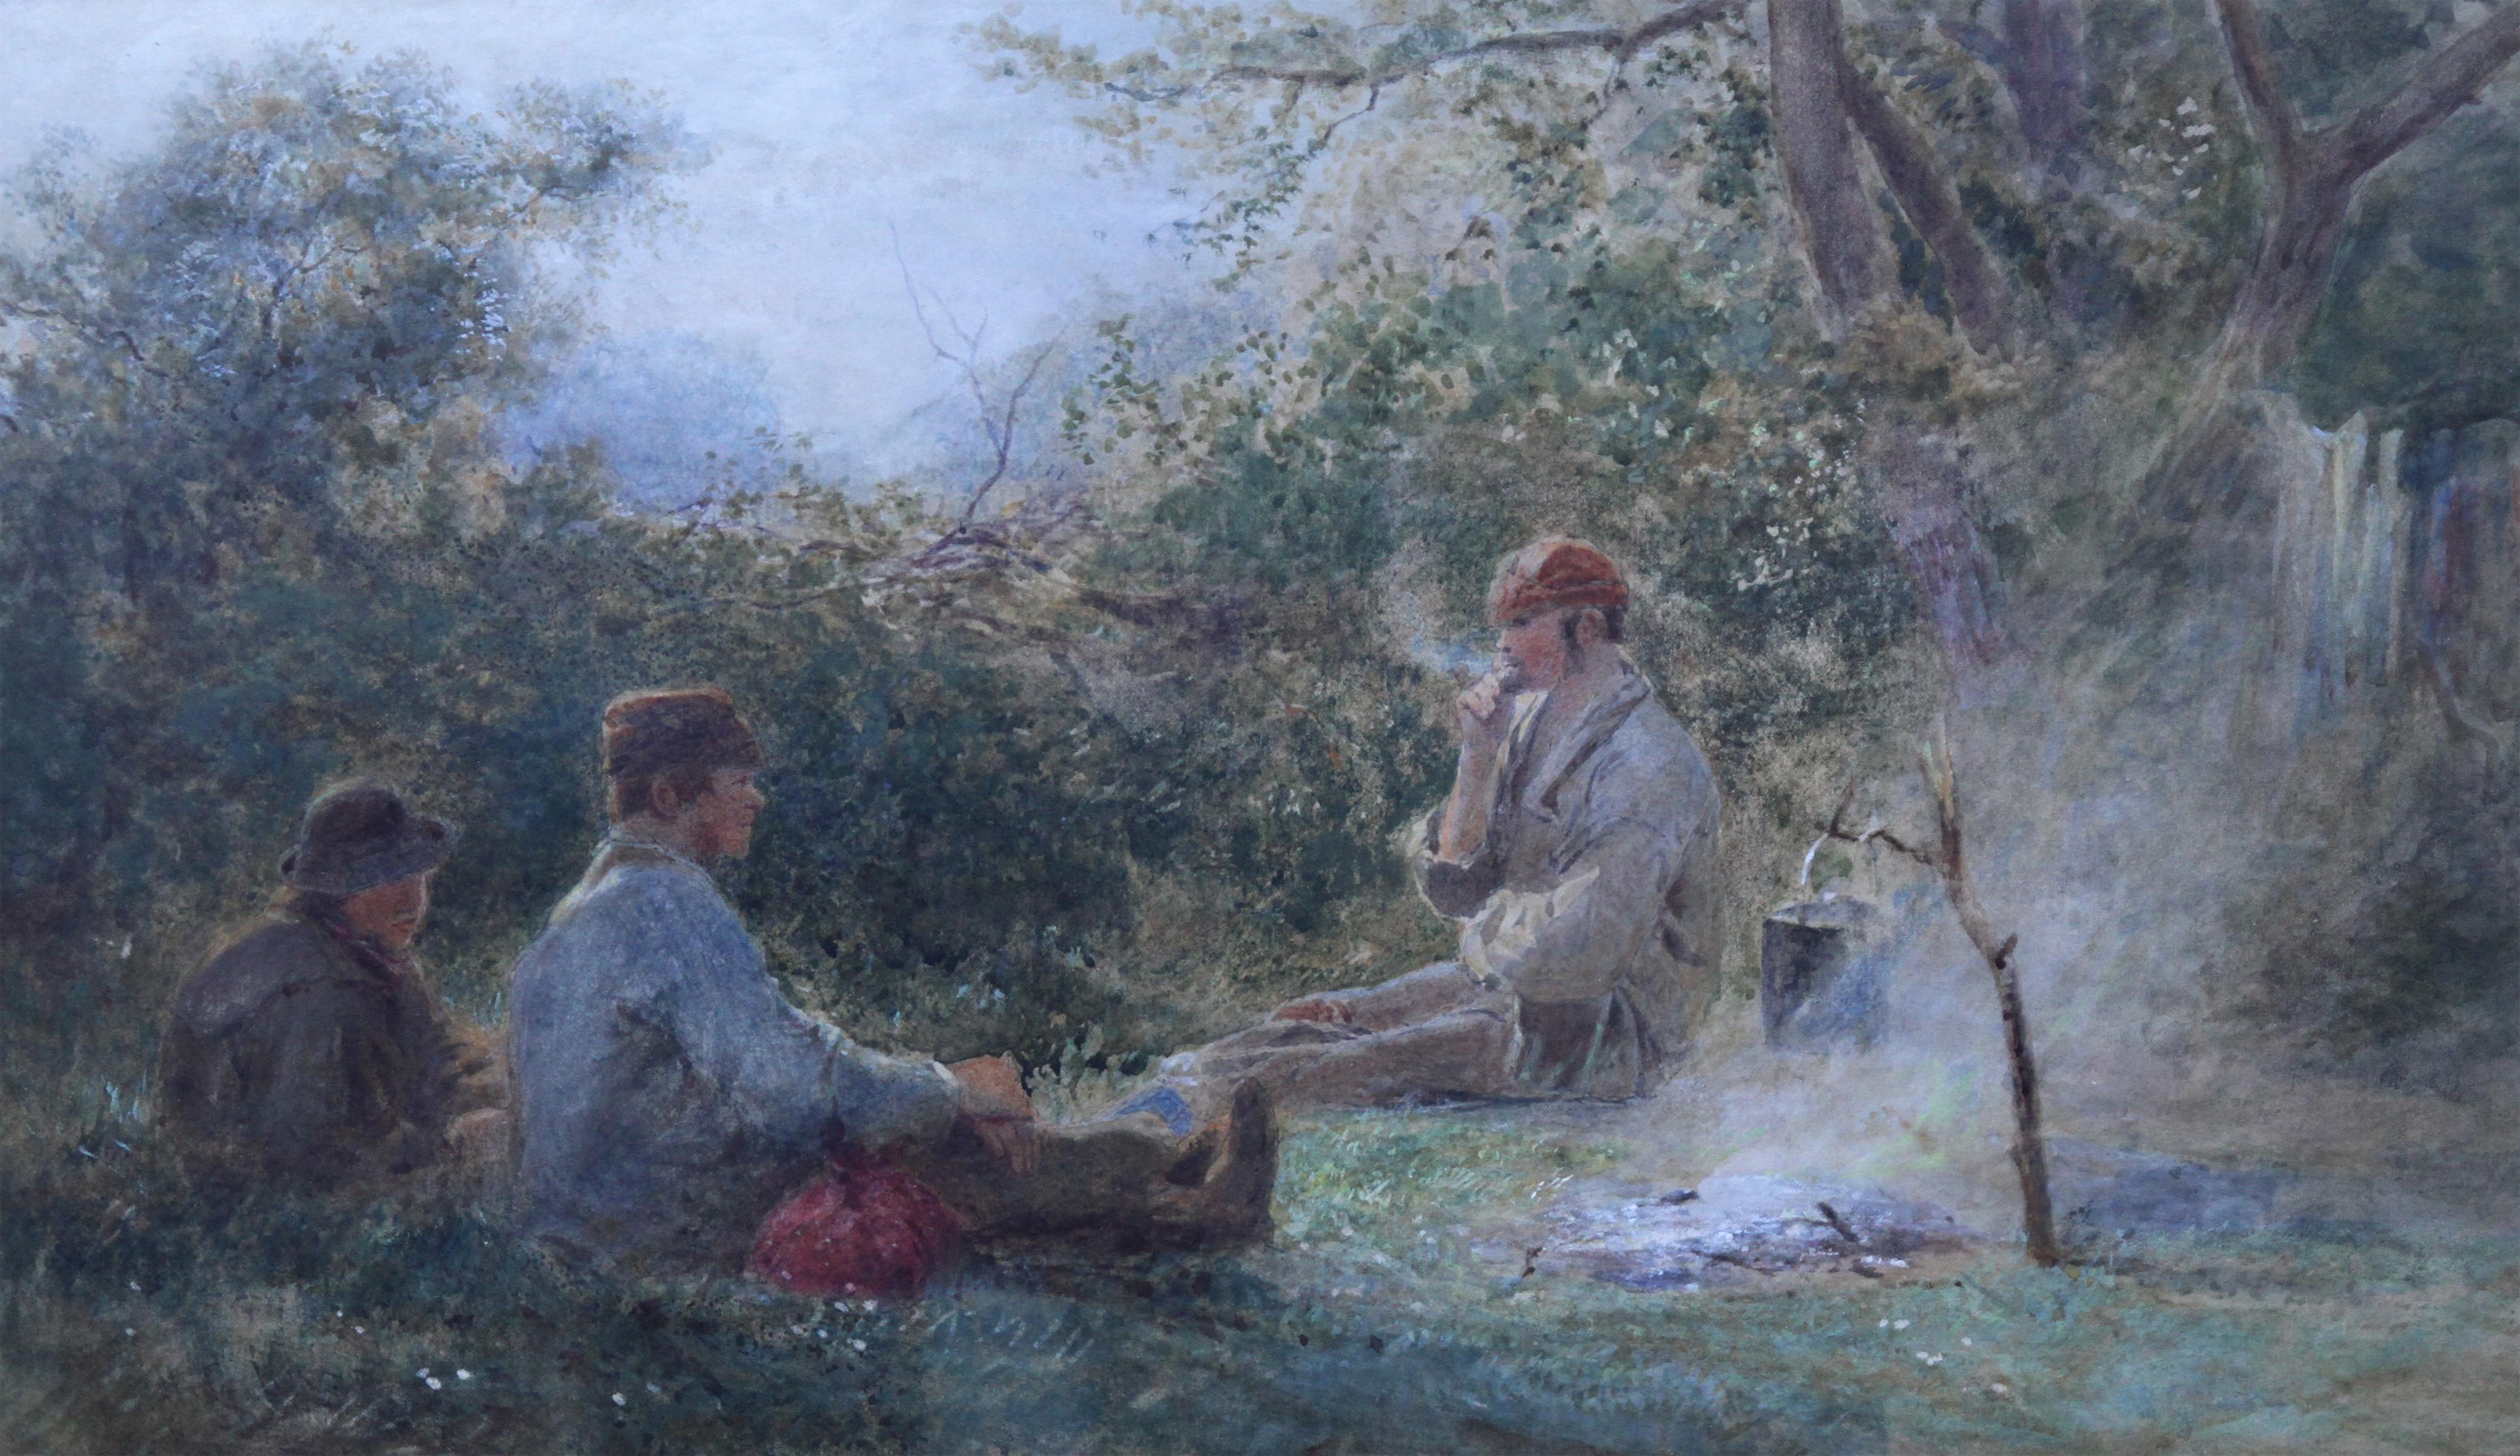 Gypsies Around a Camp Fire - British art Victorian painting pastoral landscape - Art by Henry George Hine